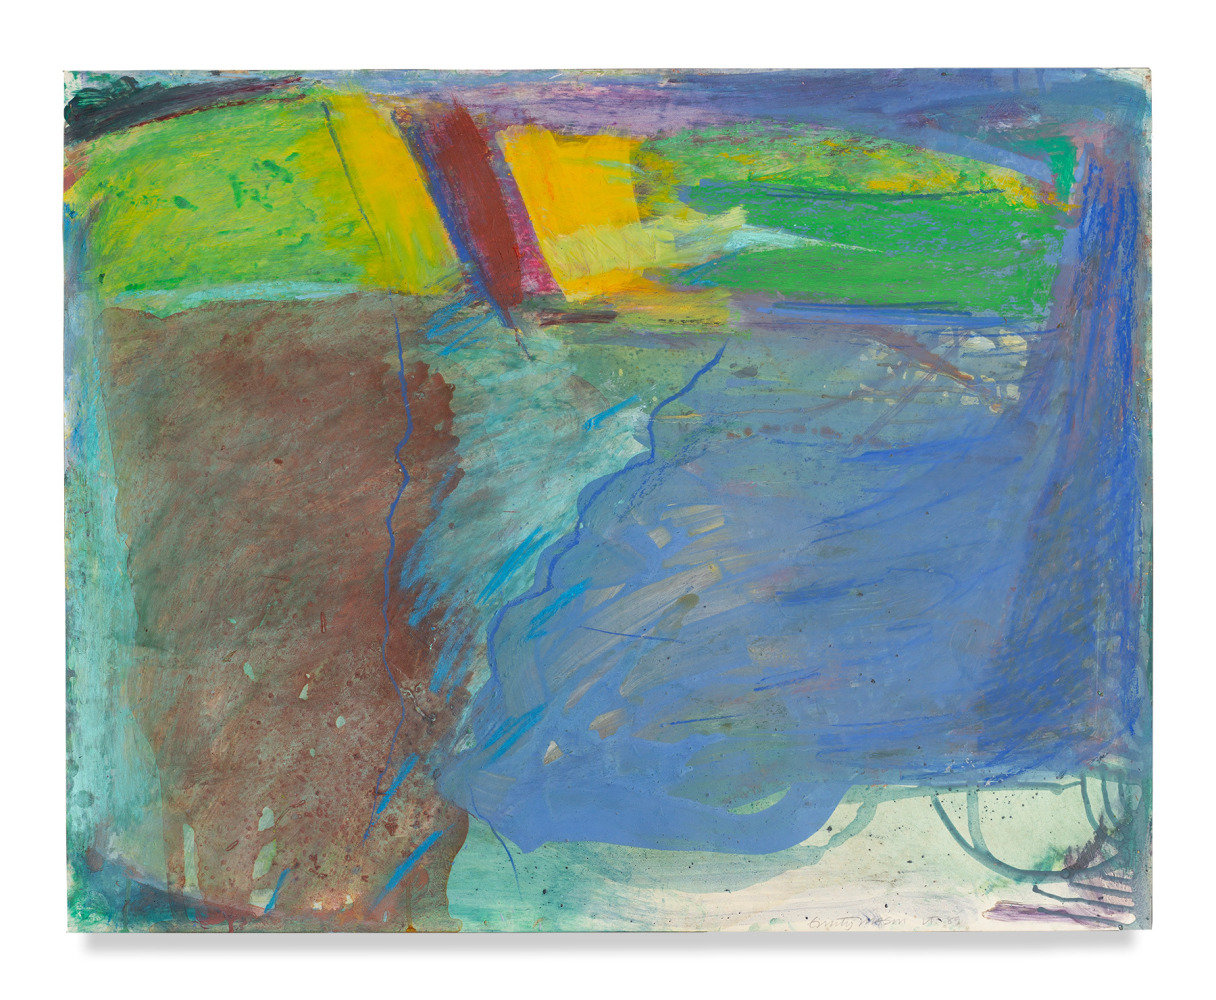 Emily Mason

And Miles To Go, 1989

Oil on paper

23h x 29w in

&amp;nbsp;